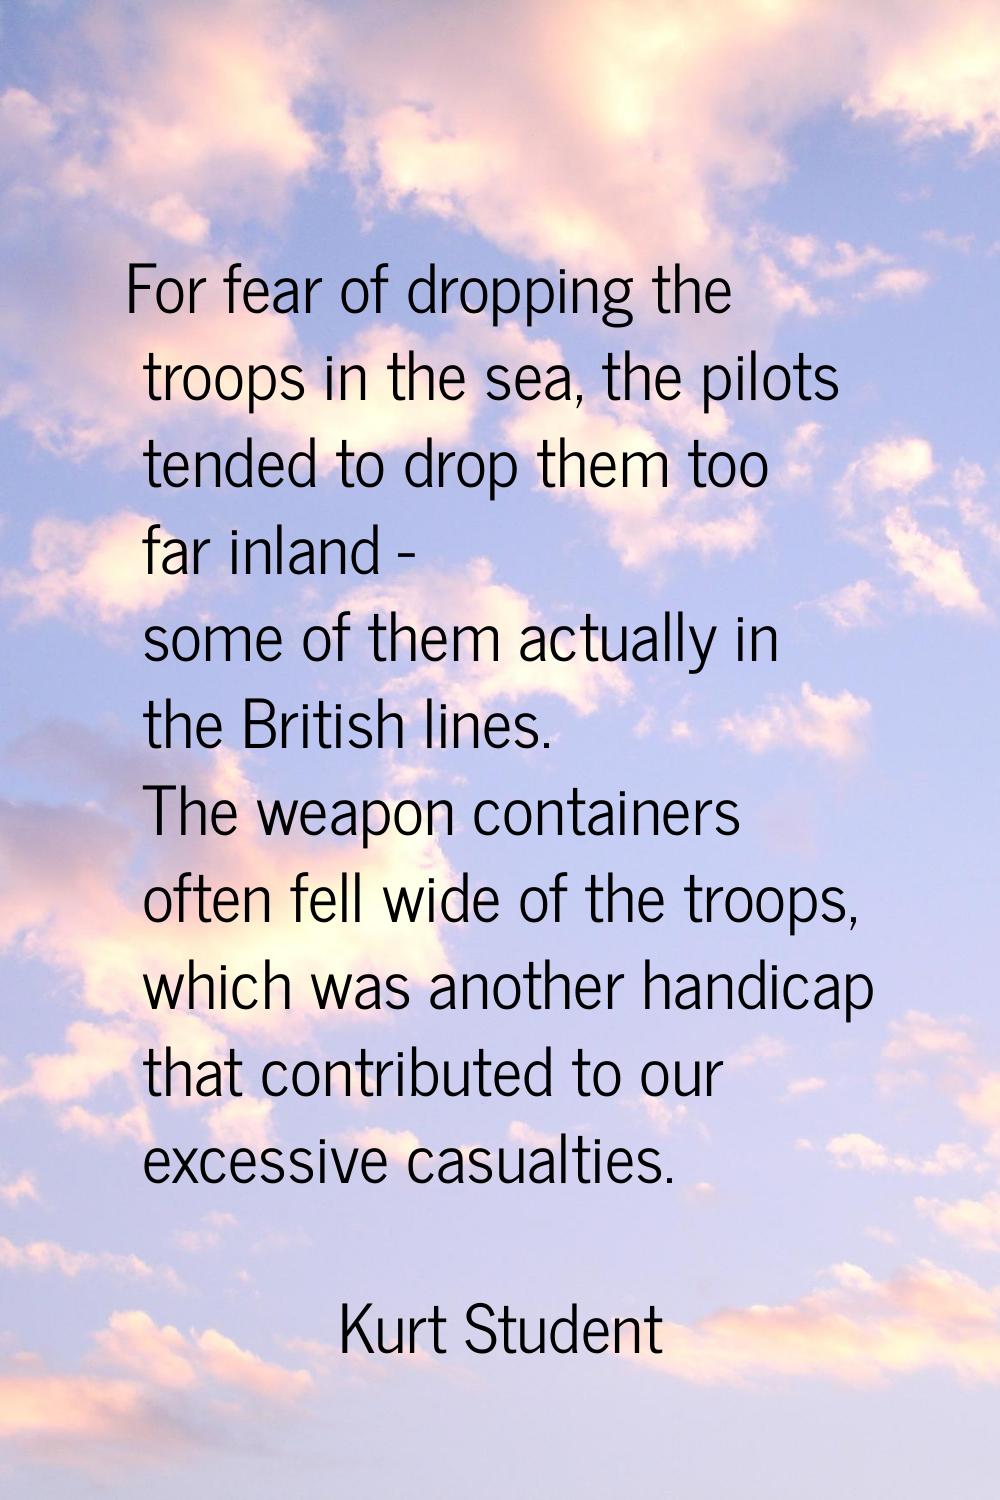 For fear of dropping the troops in the sea, the pilots tended to drop them too far inland - some of